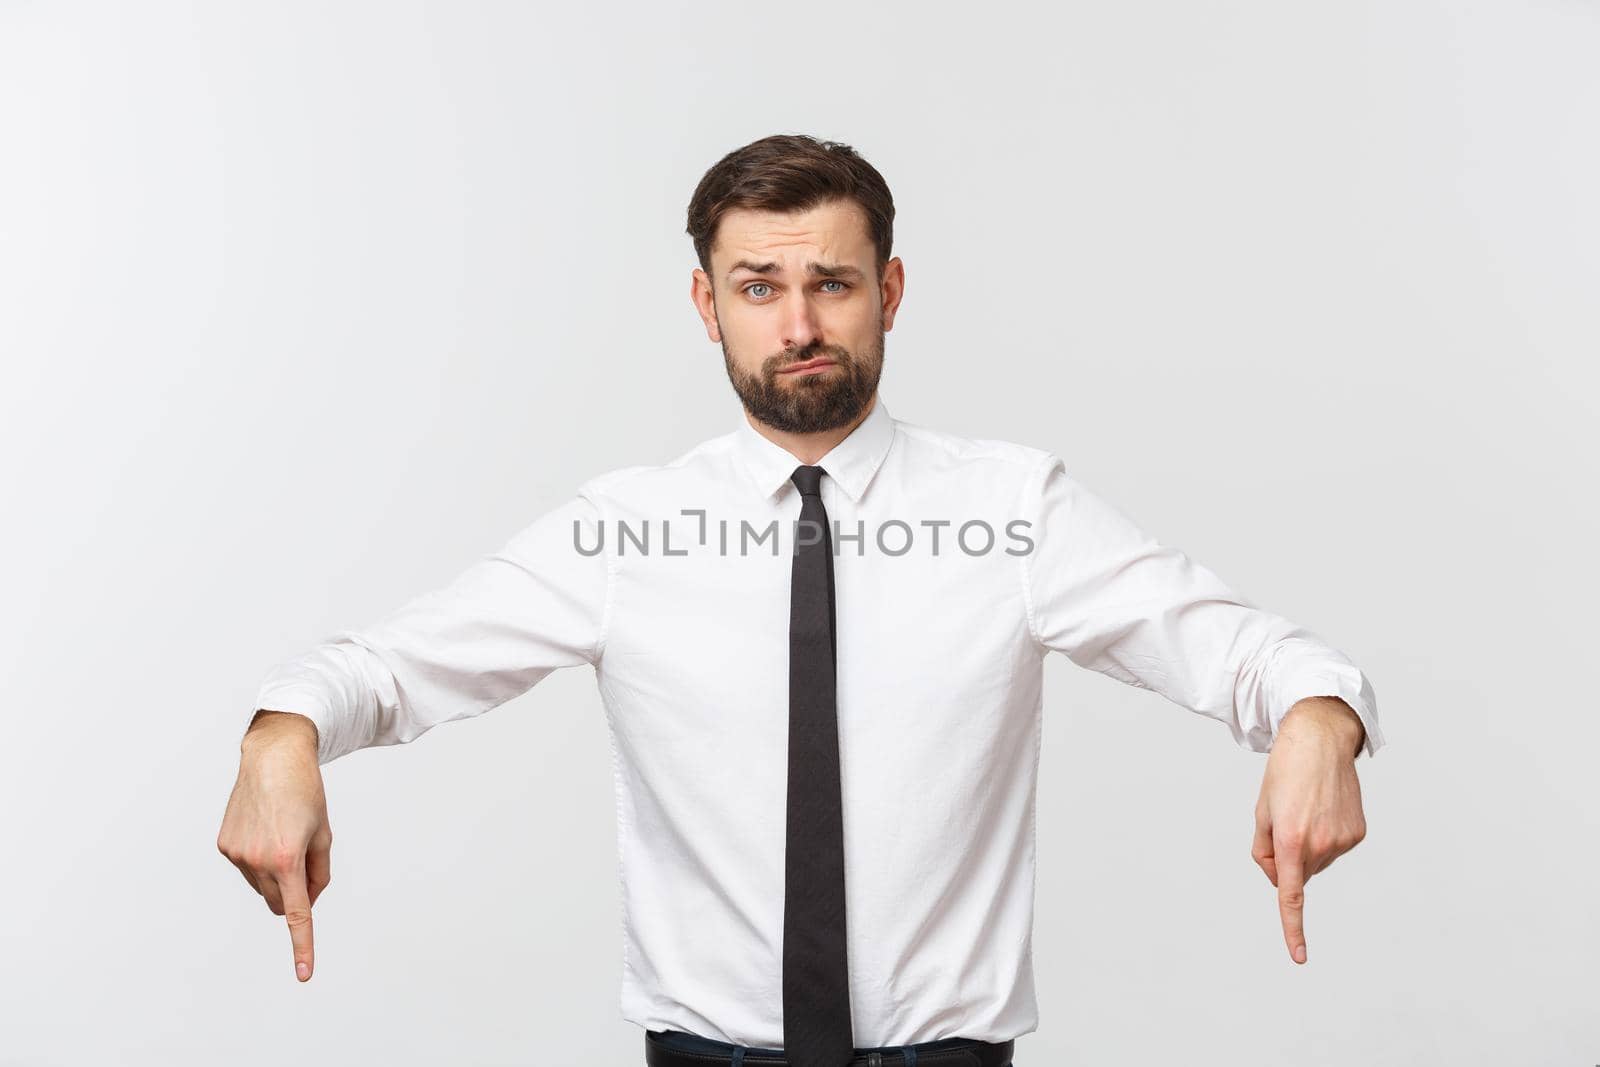 Bearded serious businessman pointing finger at you. Isolated on grey studio background.